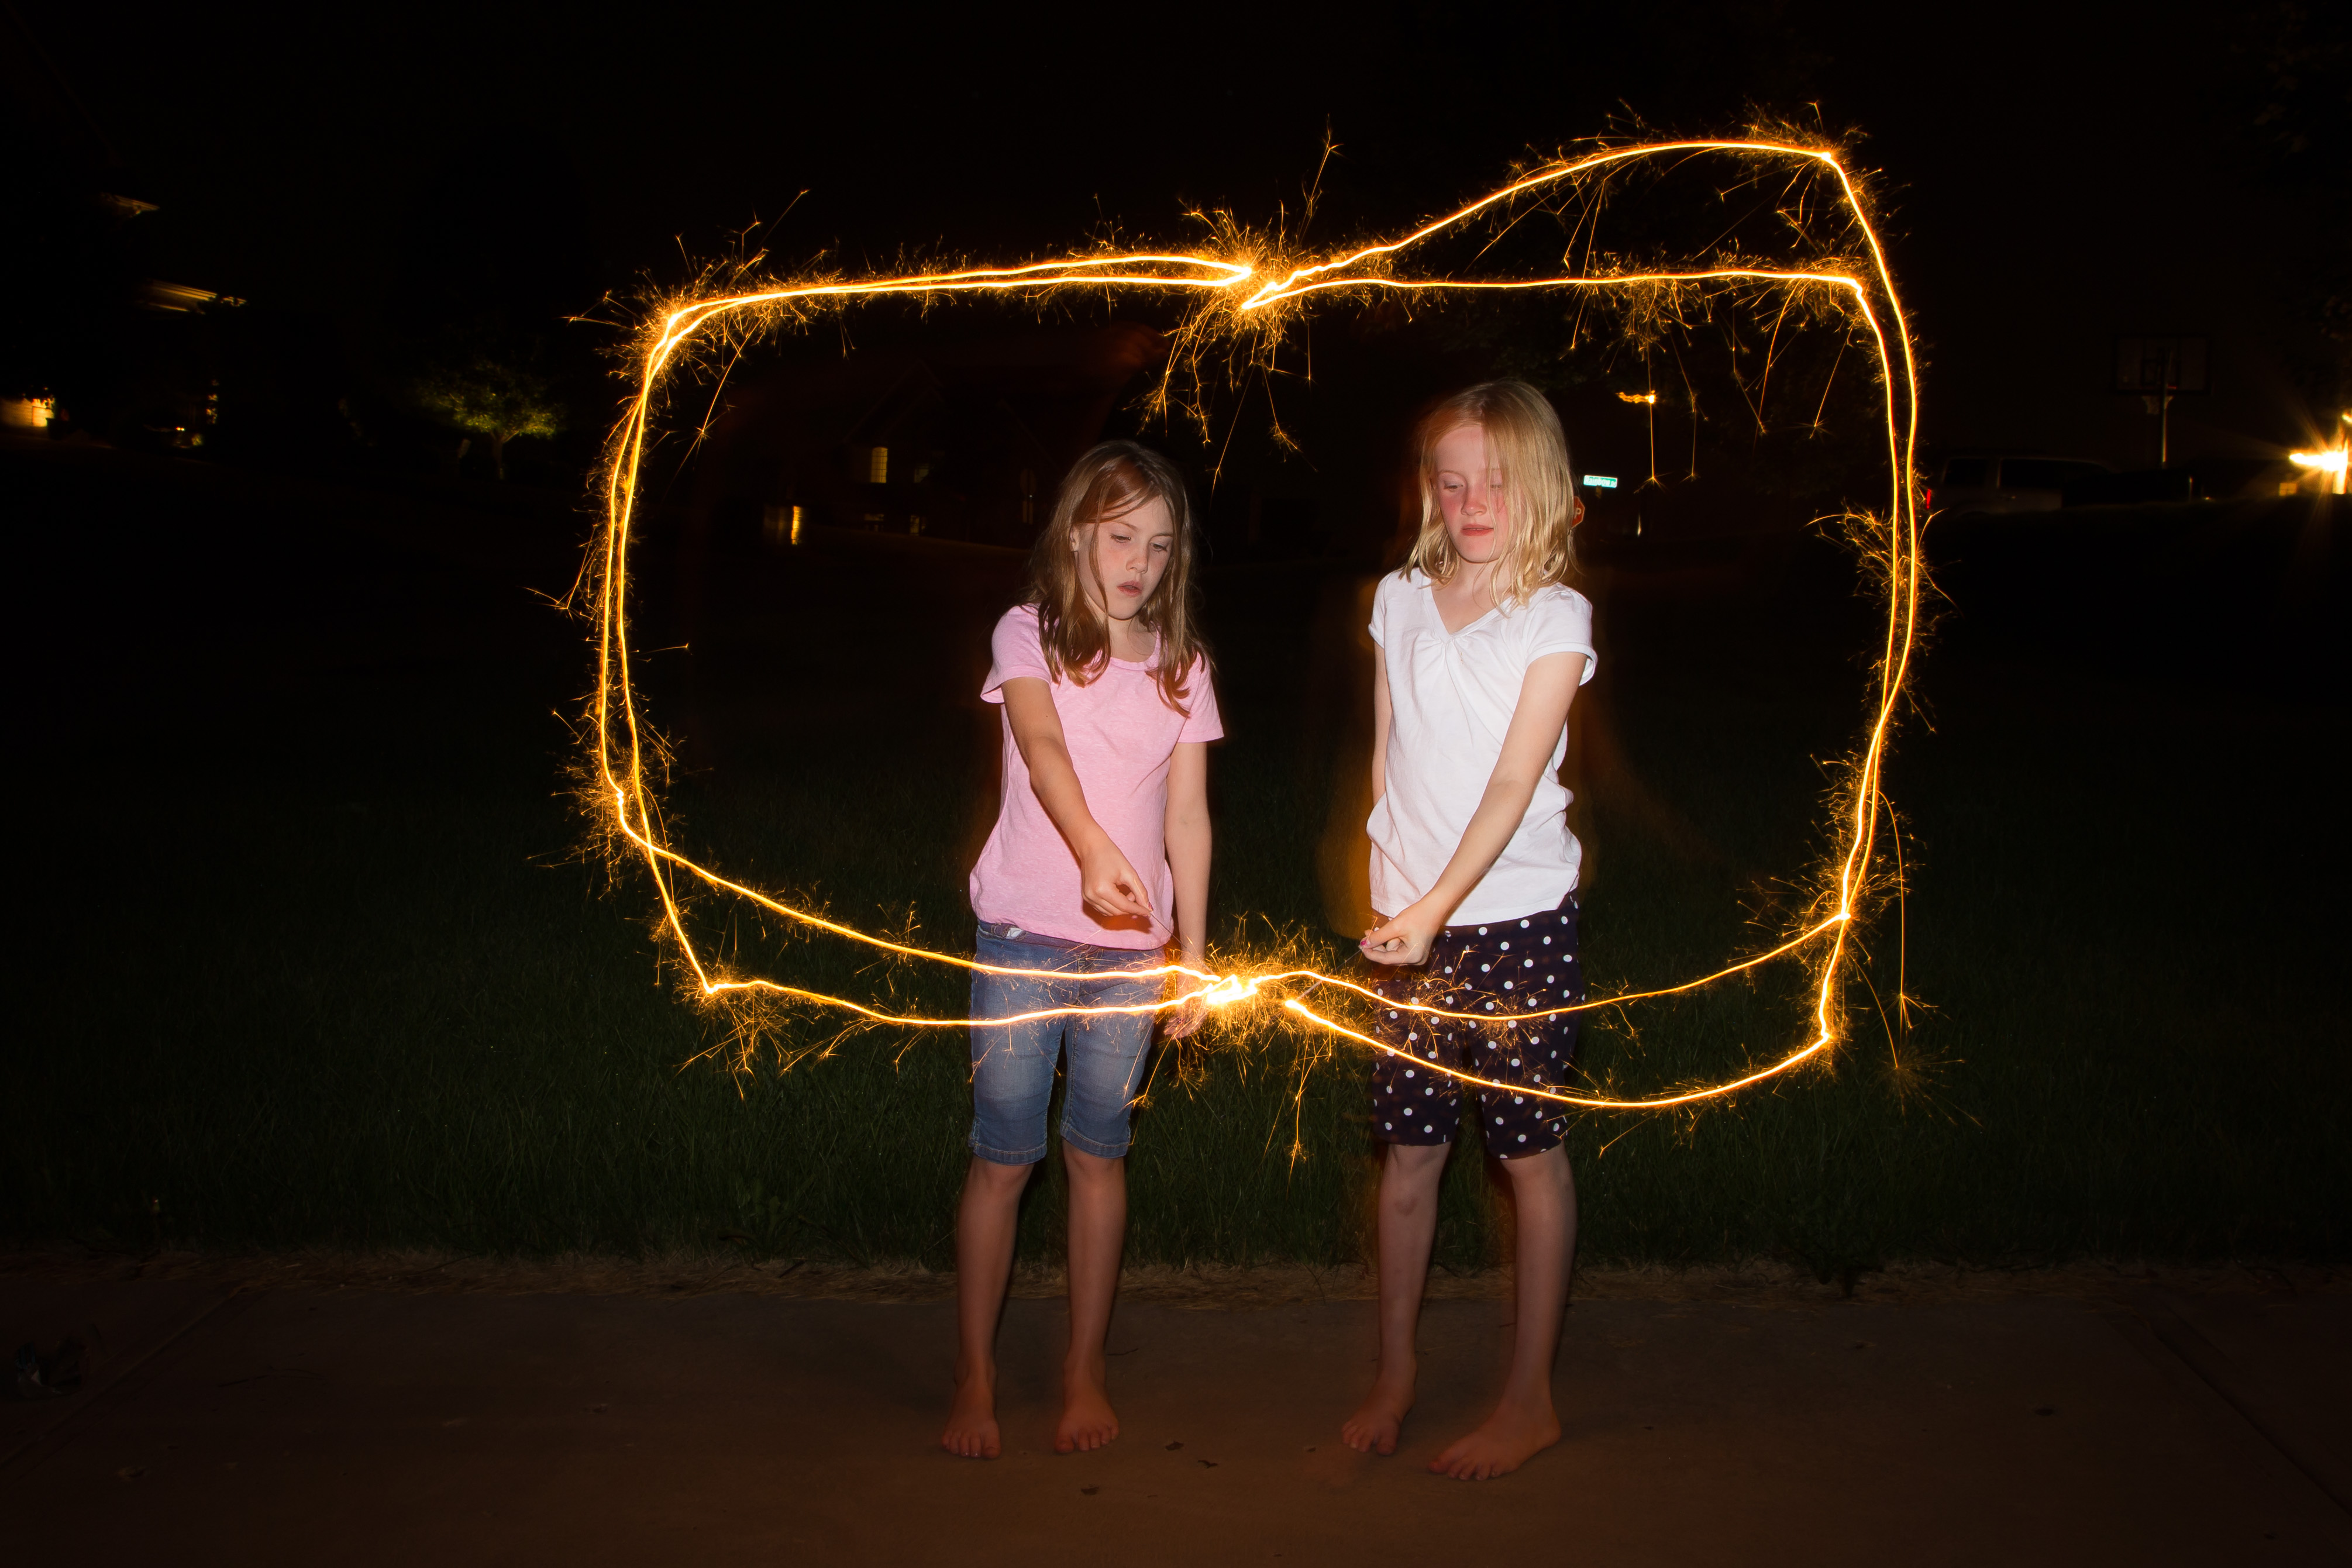 2015-07-04;Sparklers and pool 2 (11 of 12).JPG